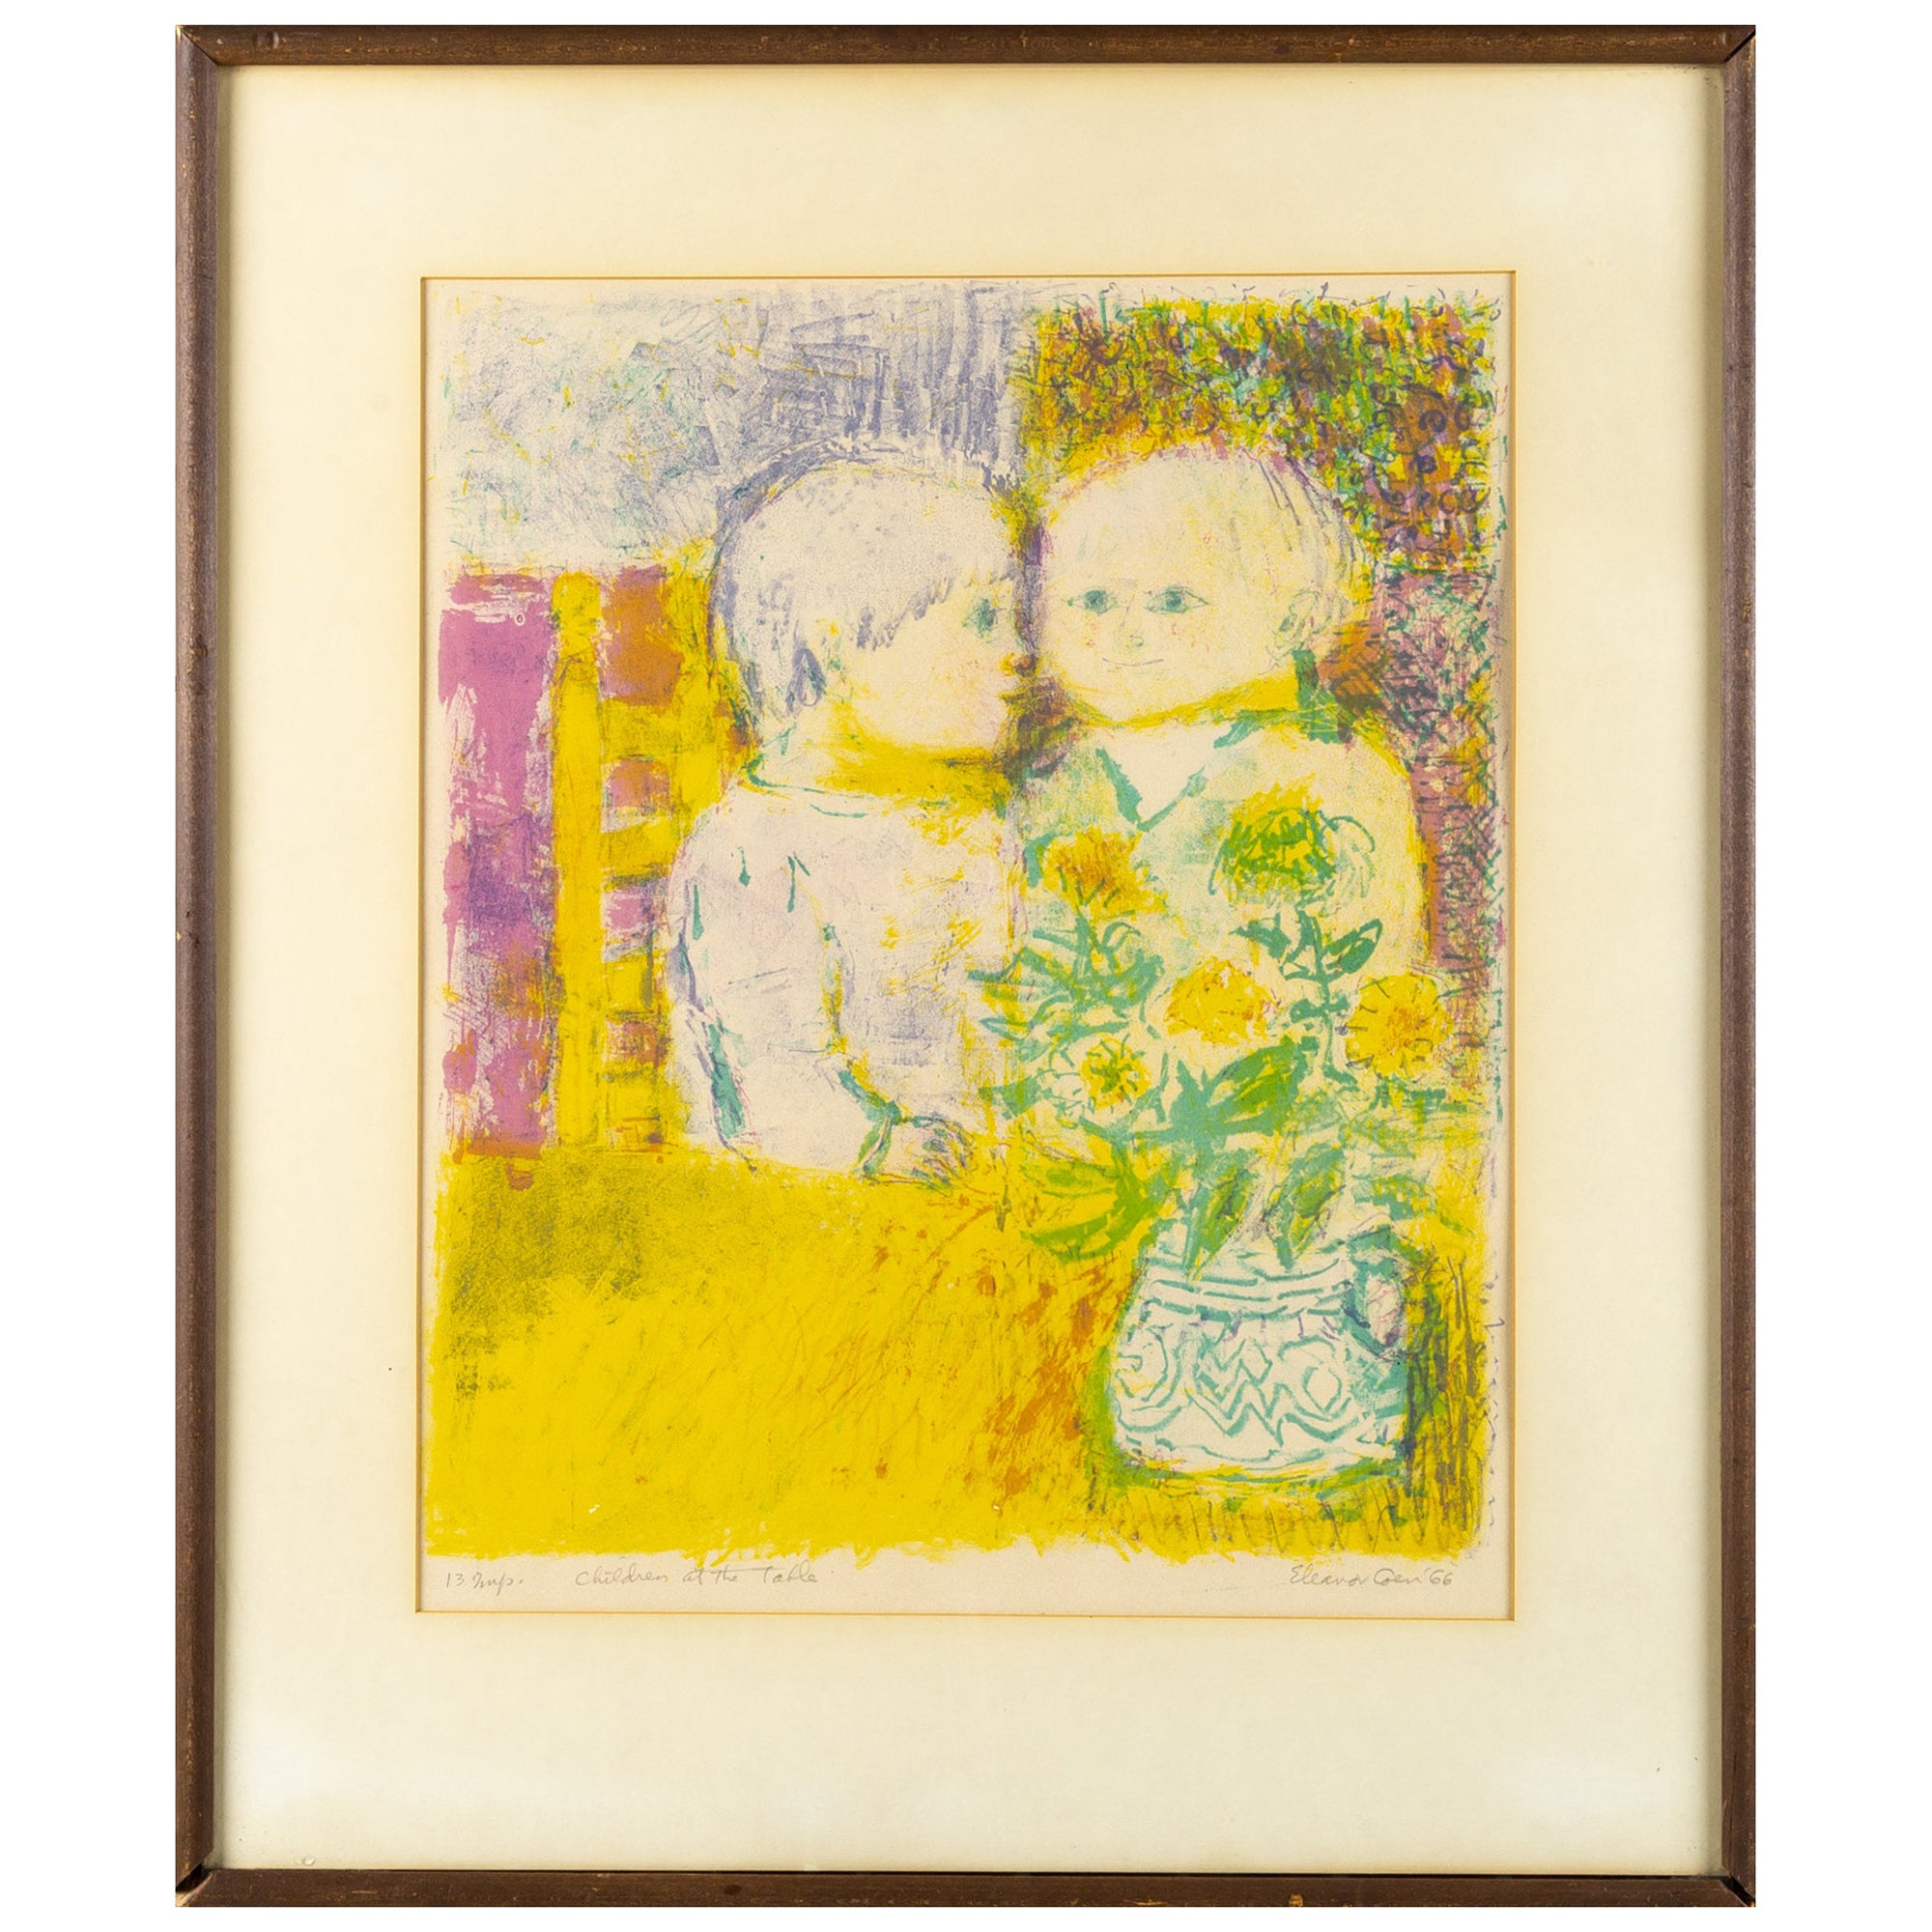 Eleanor Coen 'Children At The Table' Signed 1966 Wall Art For Sale